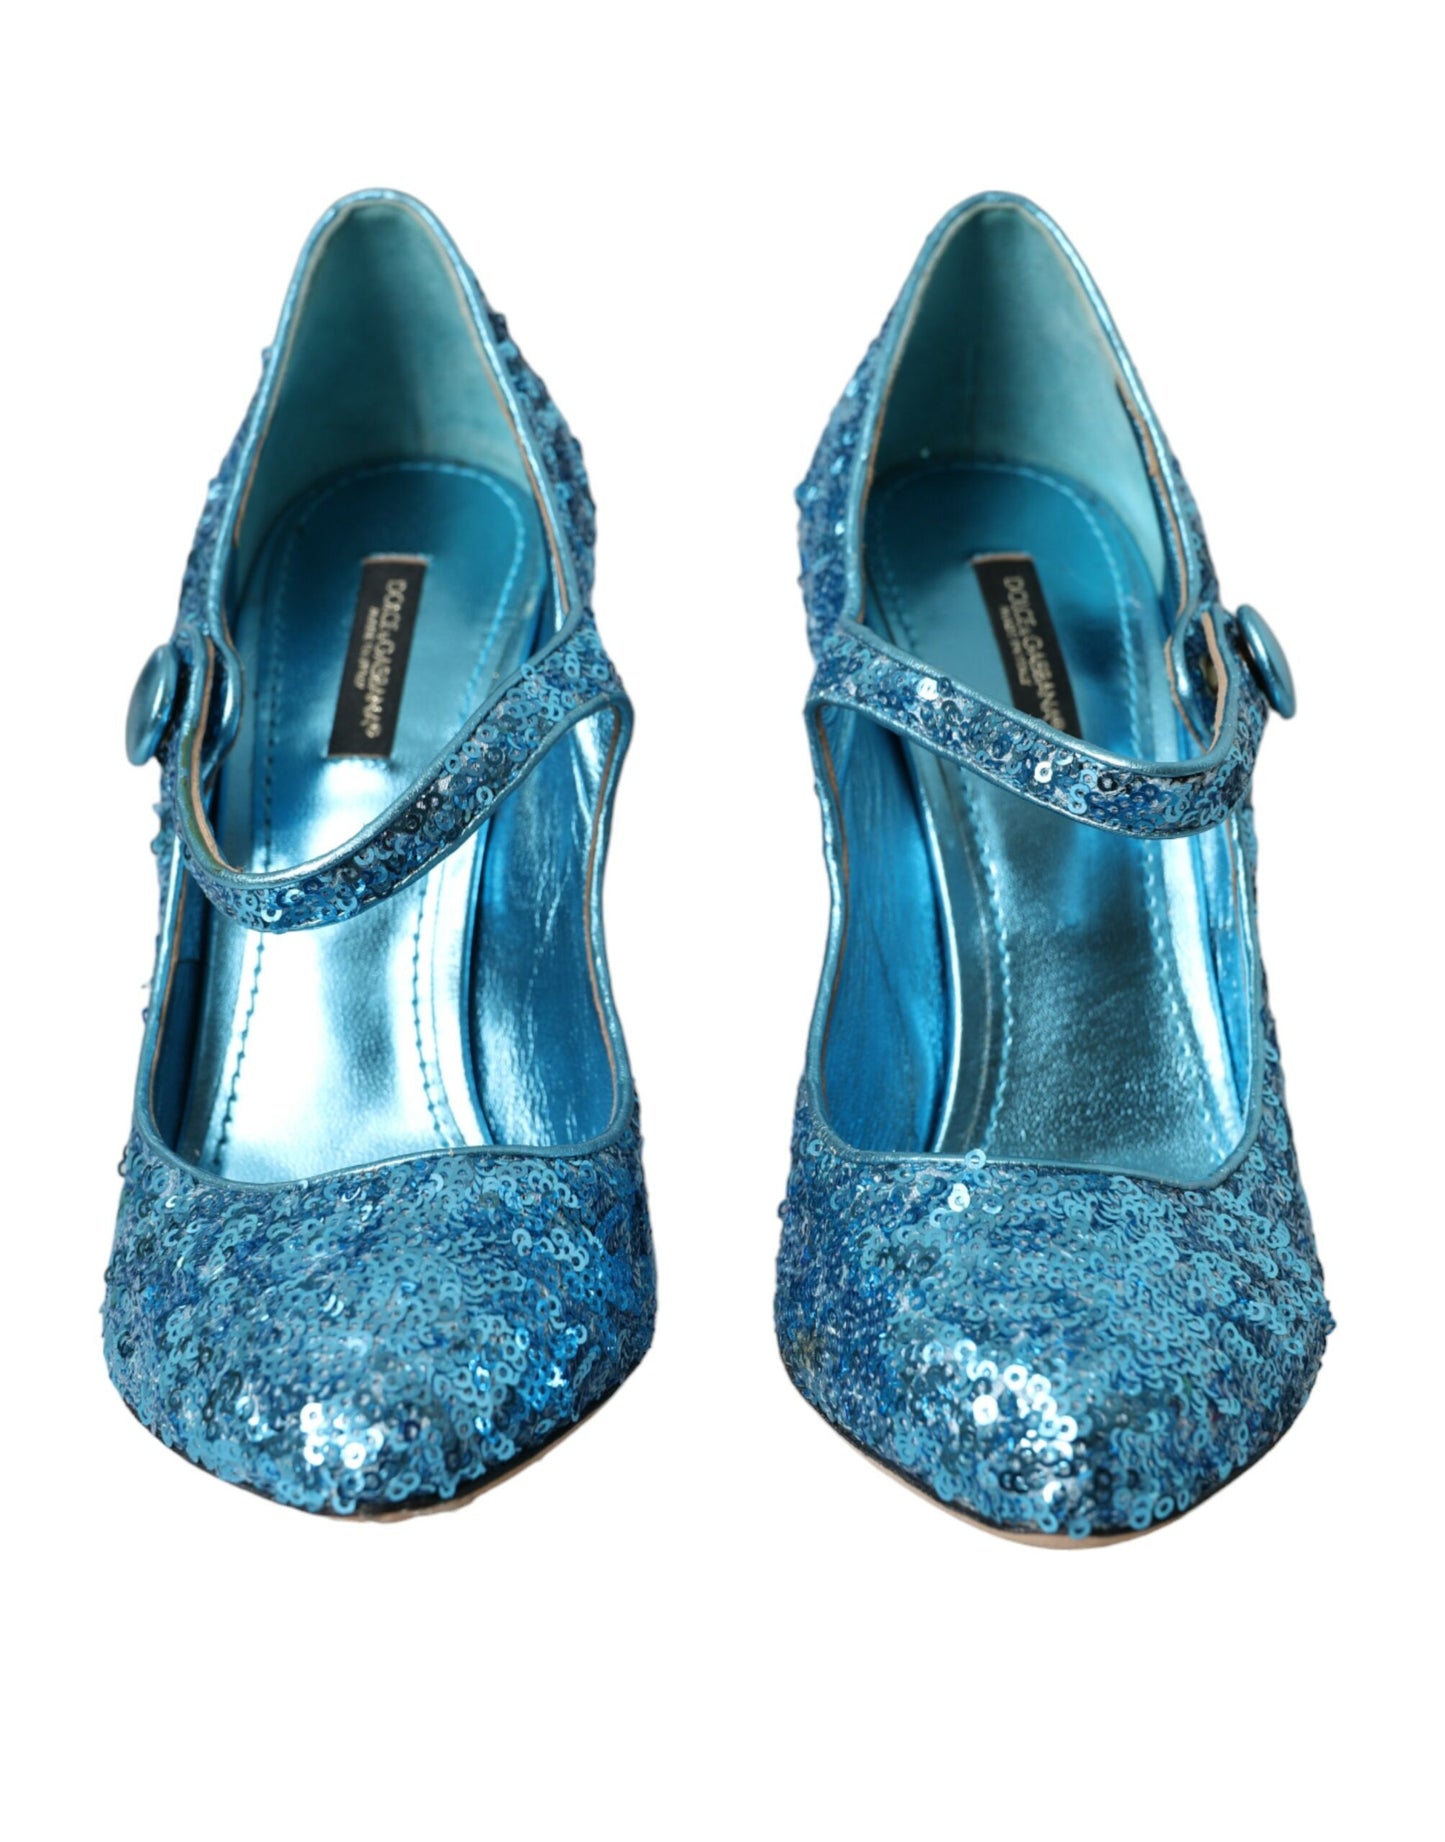 Blue Sequin Mary Jane Pumps High Heels Shoes